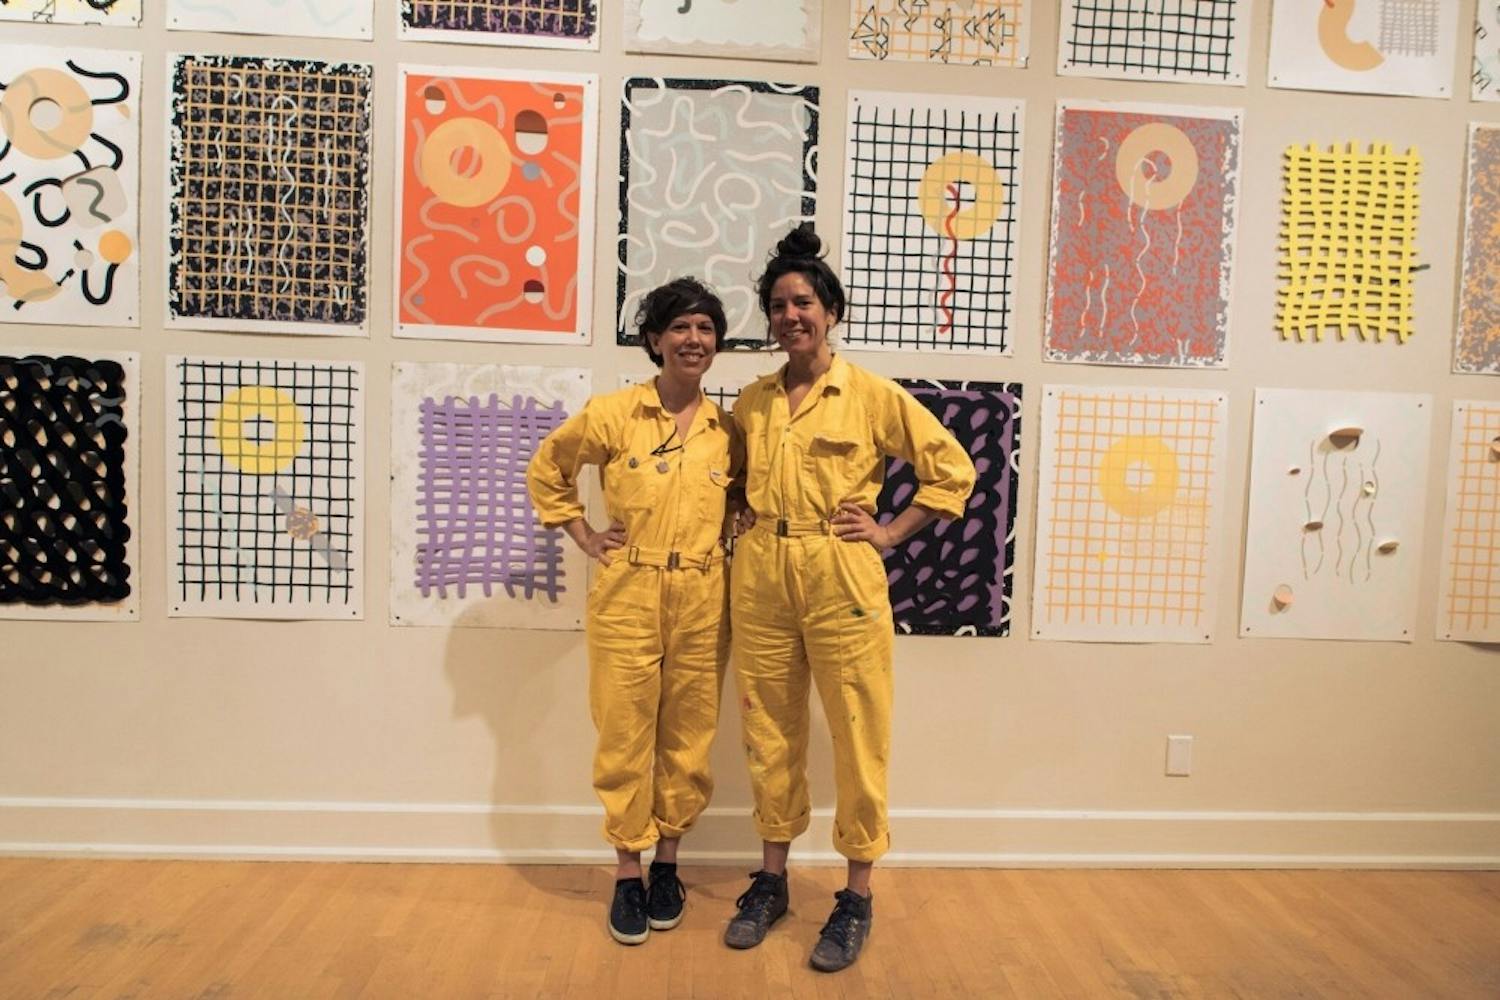 Lisa Iglesias (left) and Janelle Iglesias (right) pose for a photo on July 8, 2017.  Las Hermanas Iglesias's exhibit, RE:SISTERS, will be featured in the ASU Art Museum until Oct. 21, 2017.